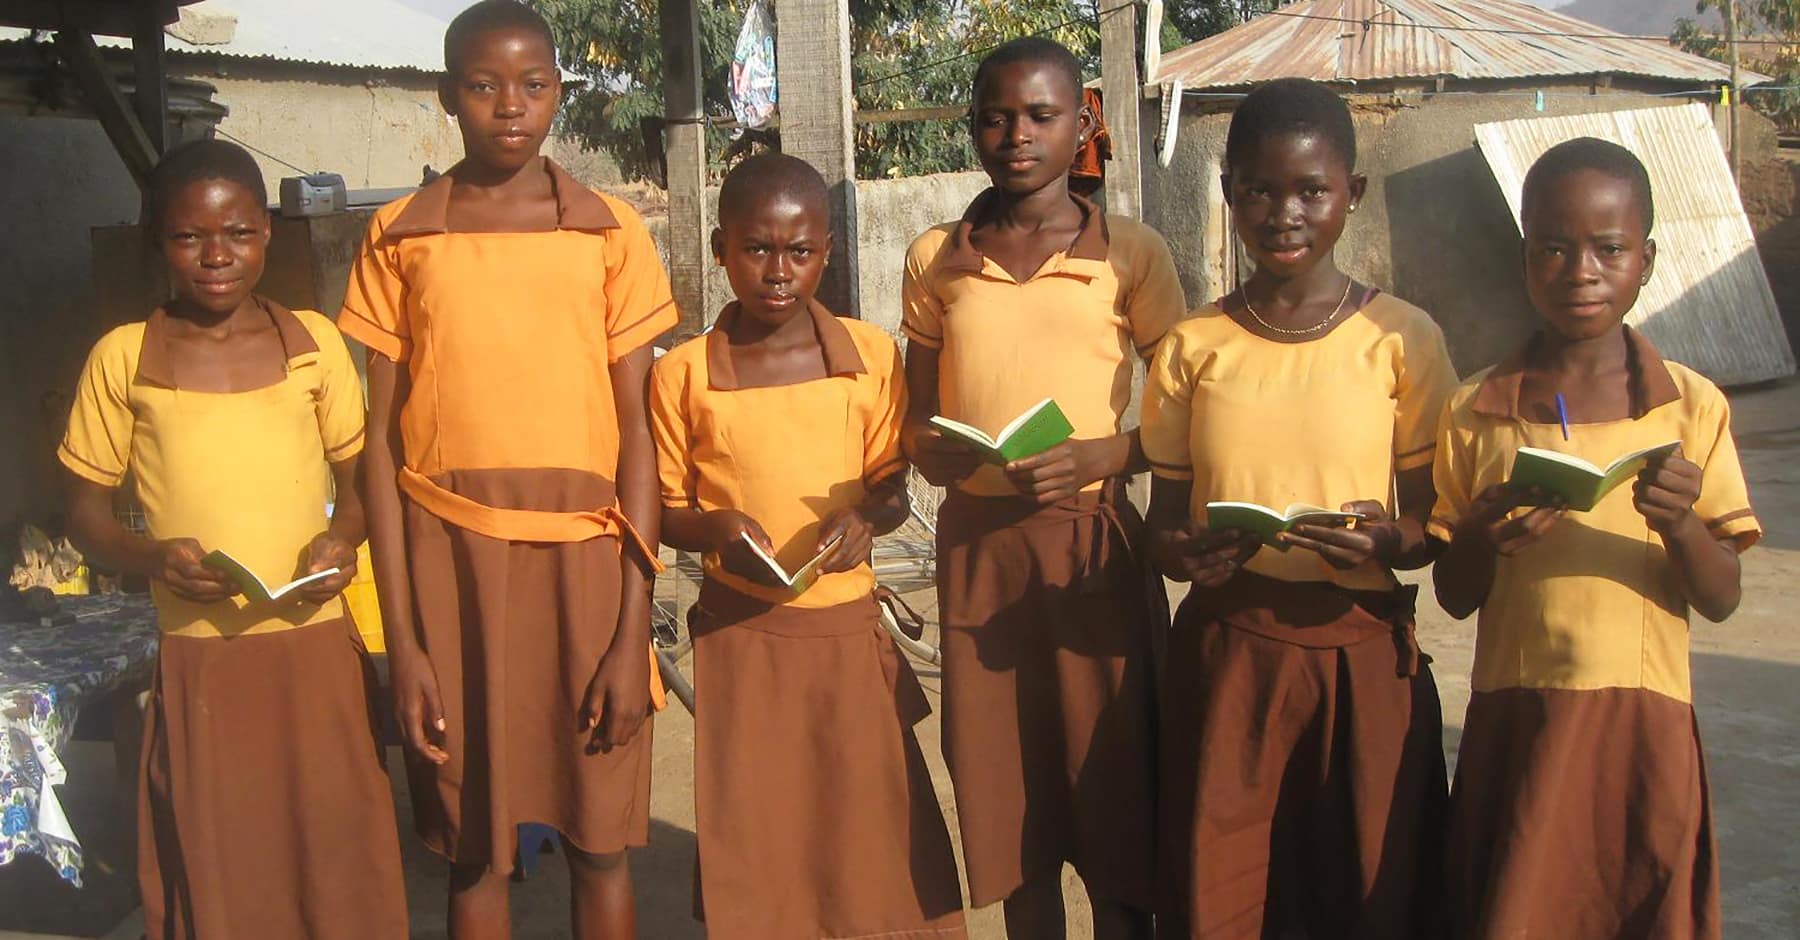 Ghana school girls with Luther's Small Catechism